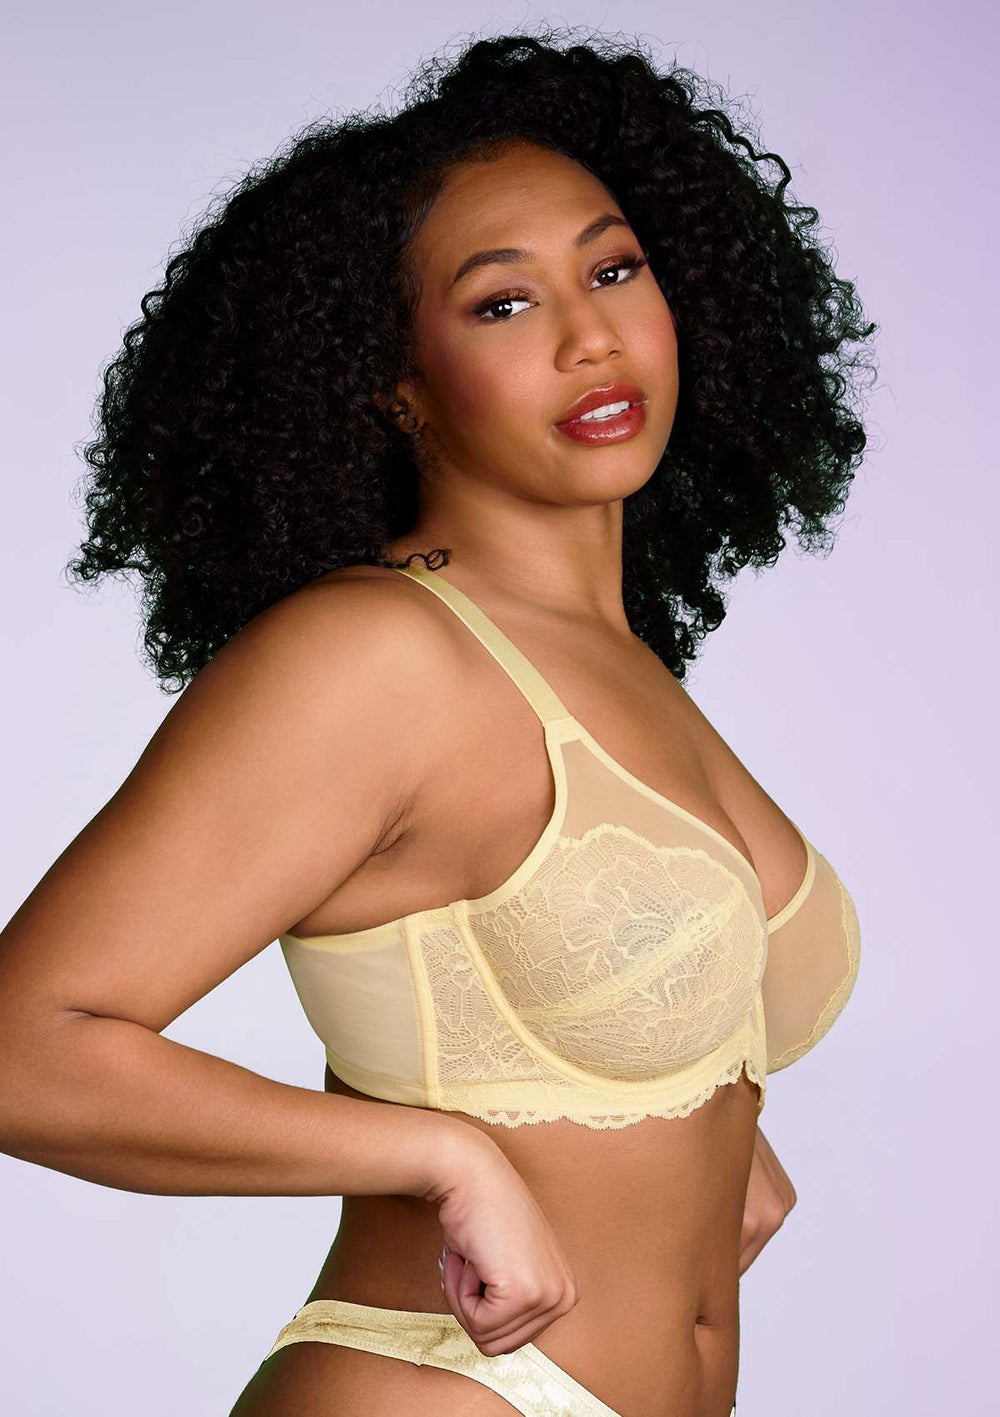 HSIA Chrysanthemum Plus Size Lace Bra: Back Support Bra for Posture